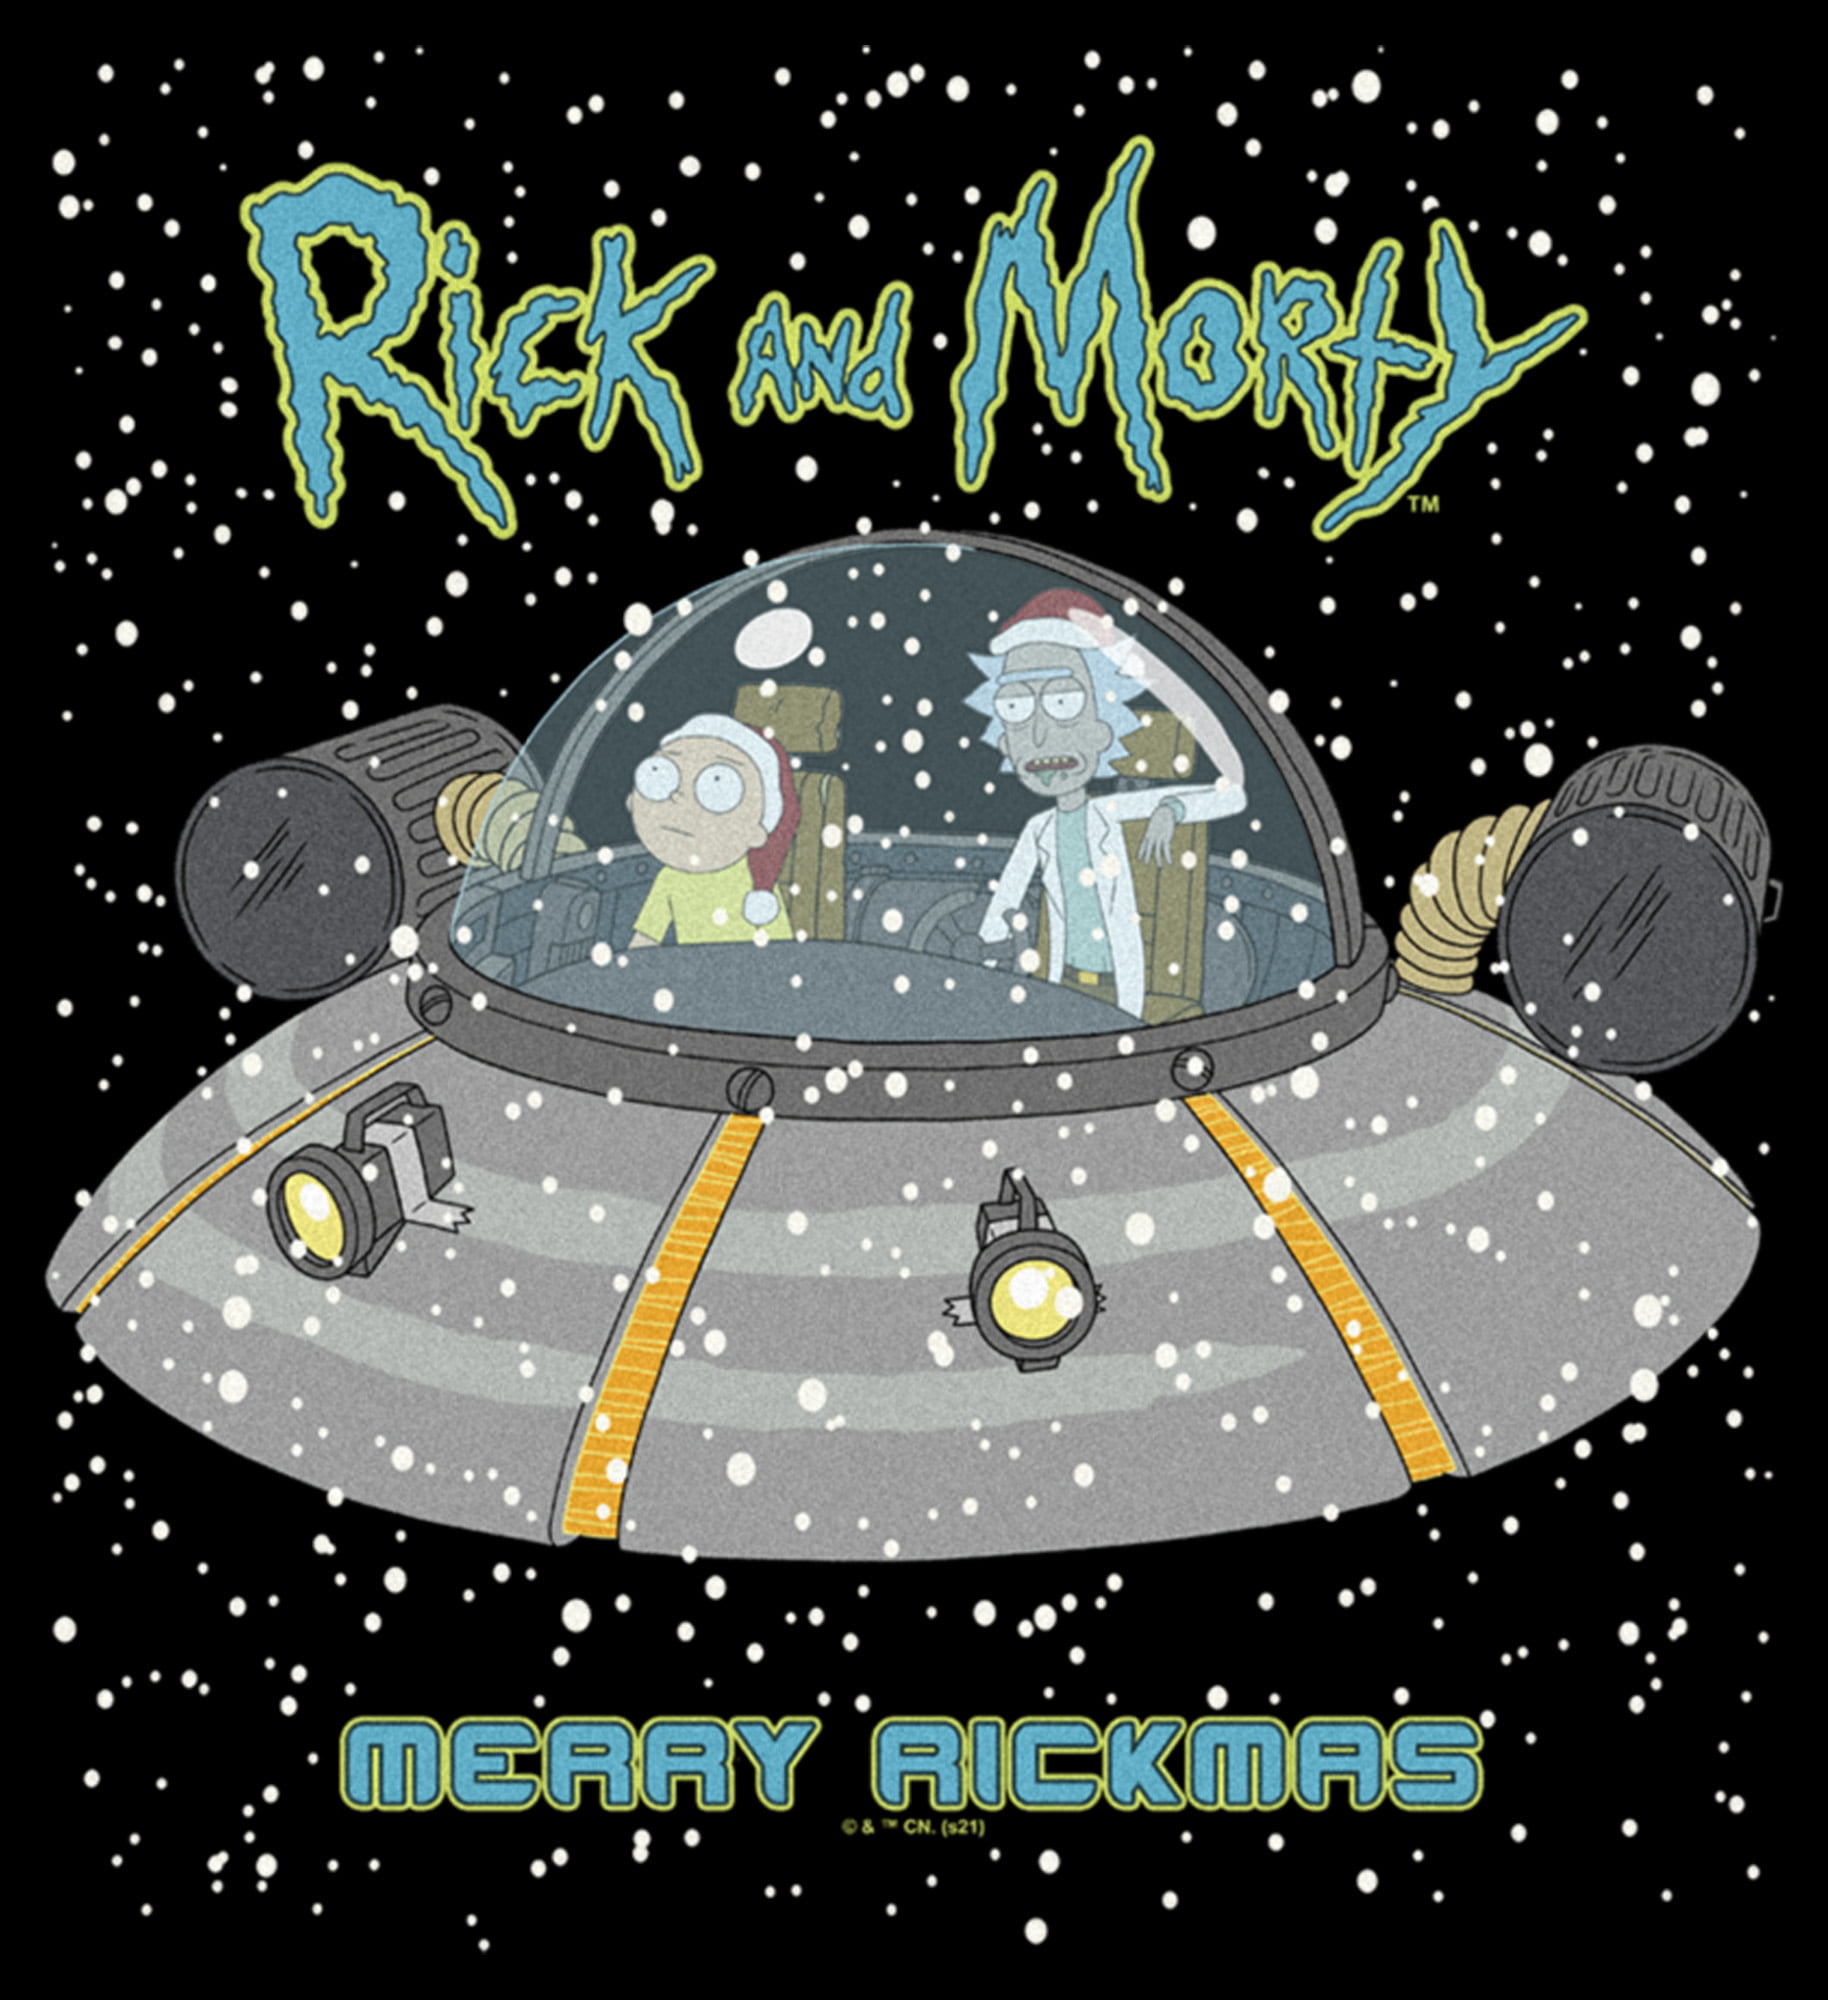 Men's Rick And Morty Snowing Spaceship Merry Rickmas Graphic Tee Black  Small 